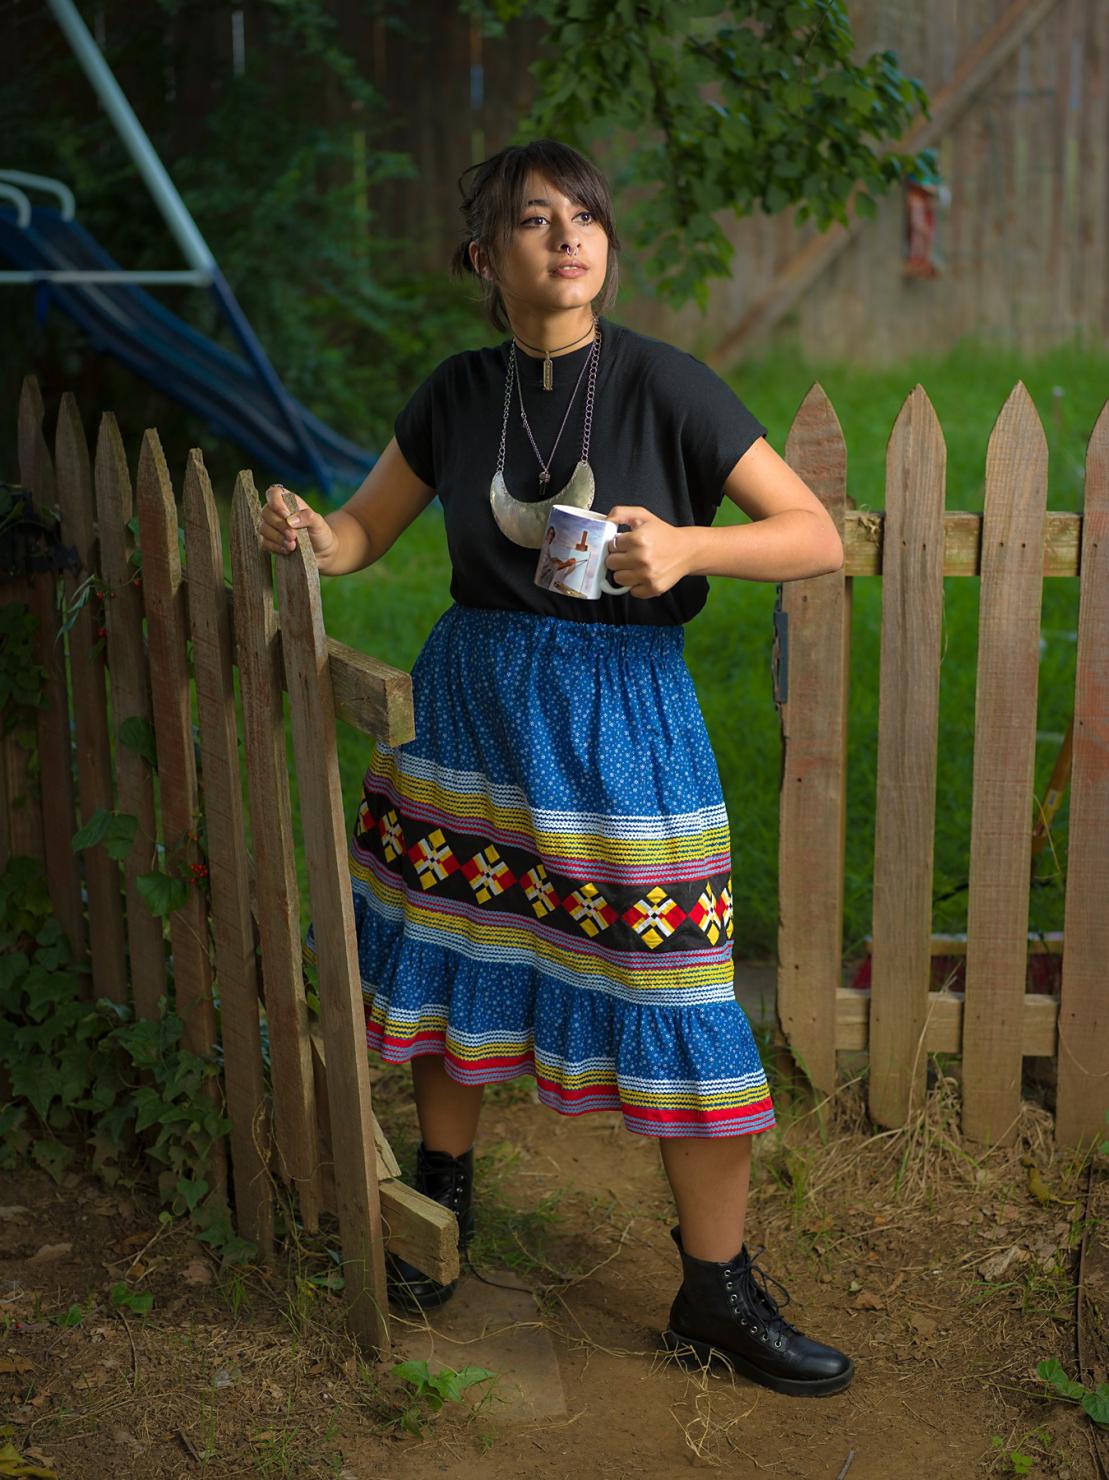 an Indigenous woman carrying a mug in her left hand walks through the gate of a wooden fence; she wears a blue ribbon skirt, black tshirt, and black boots